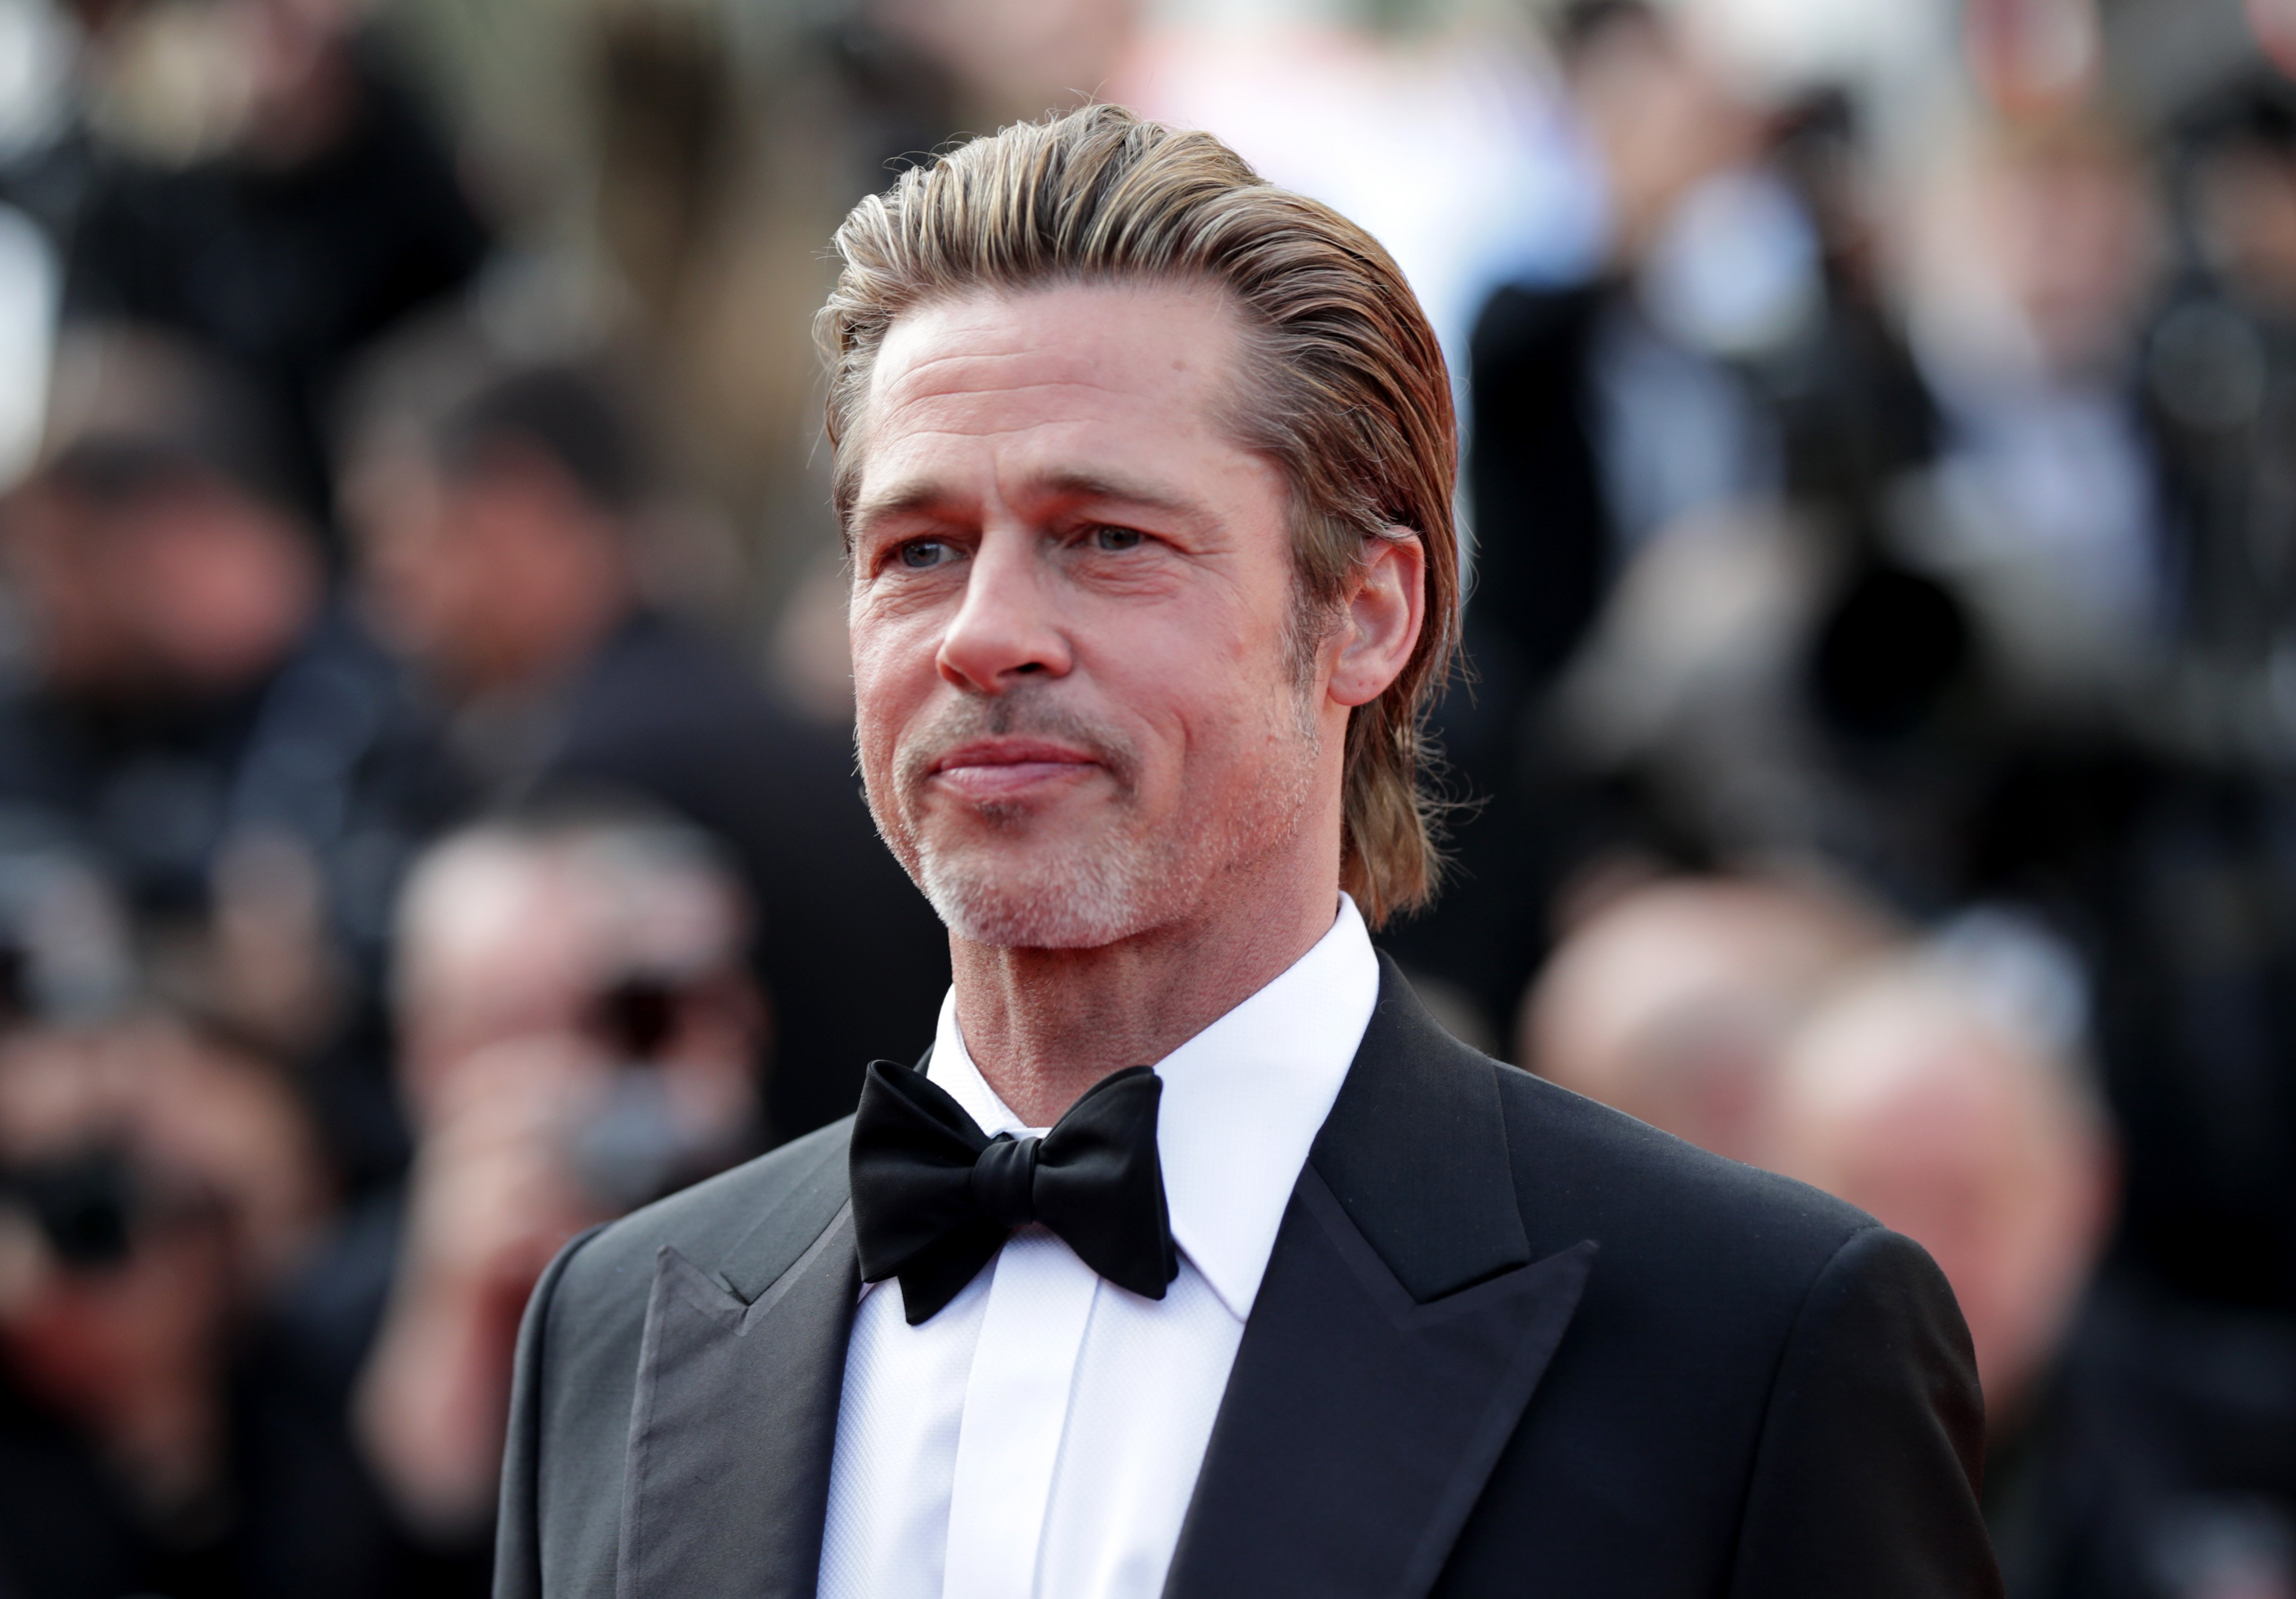 Brad Pitt attends the screening of "Once Upon A Time In Hollywood" during the 72nd annual Cannes Film Festival on May 21, 2019 | Photo: GettyImages